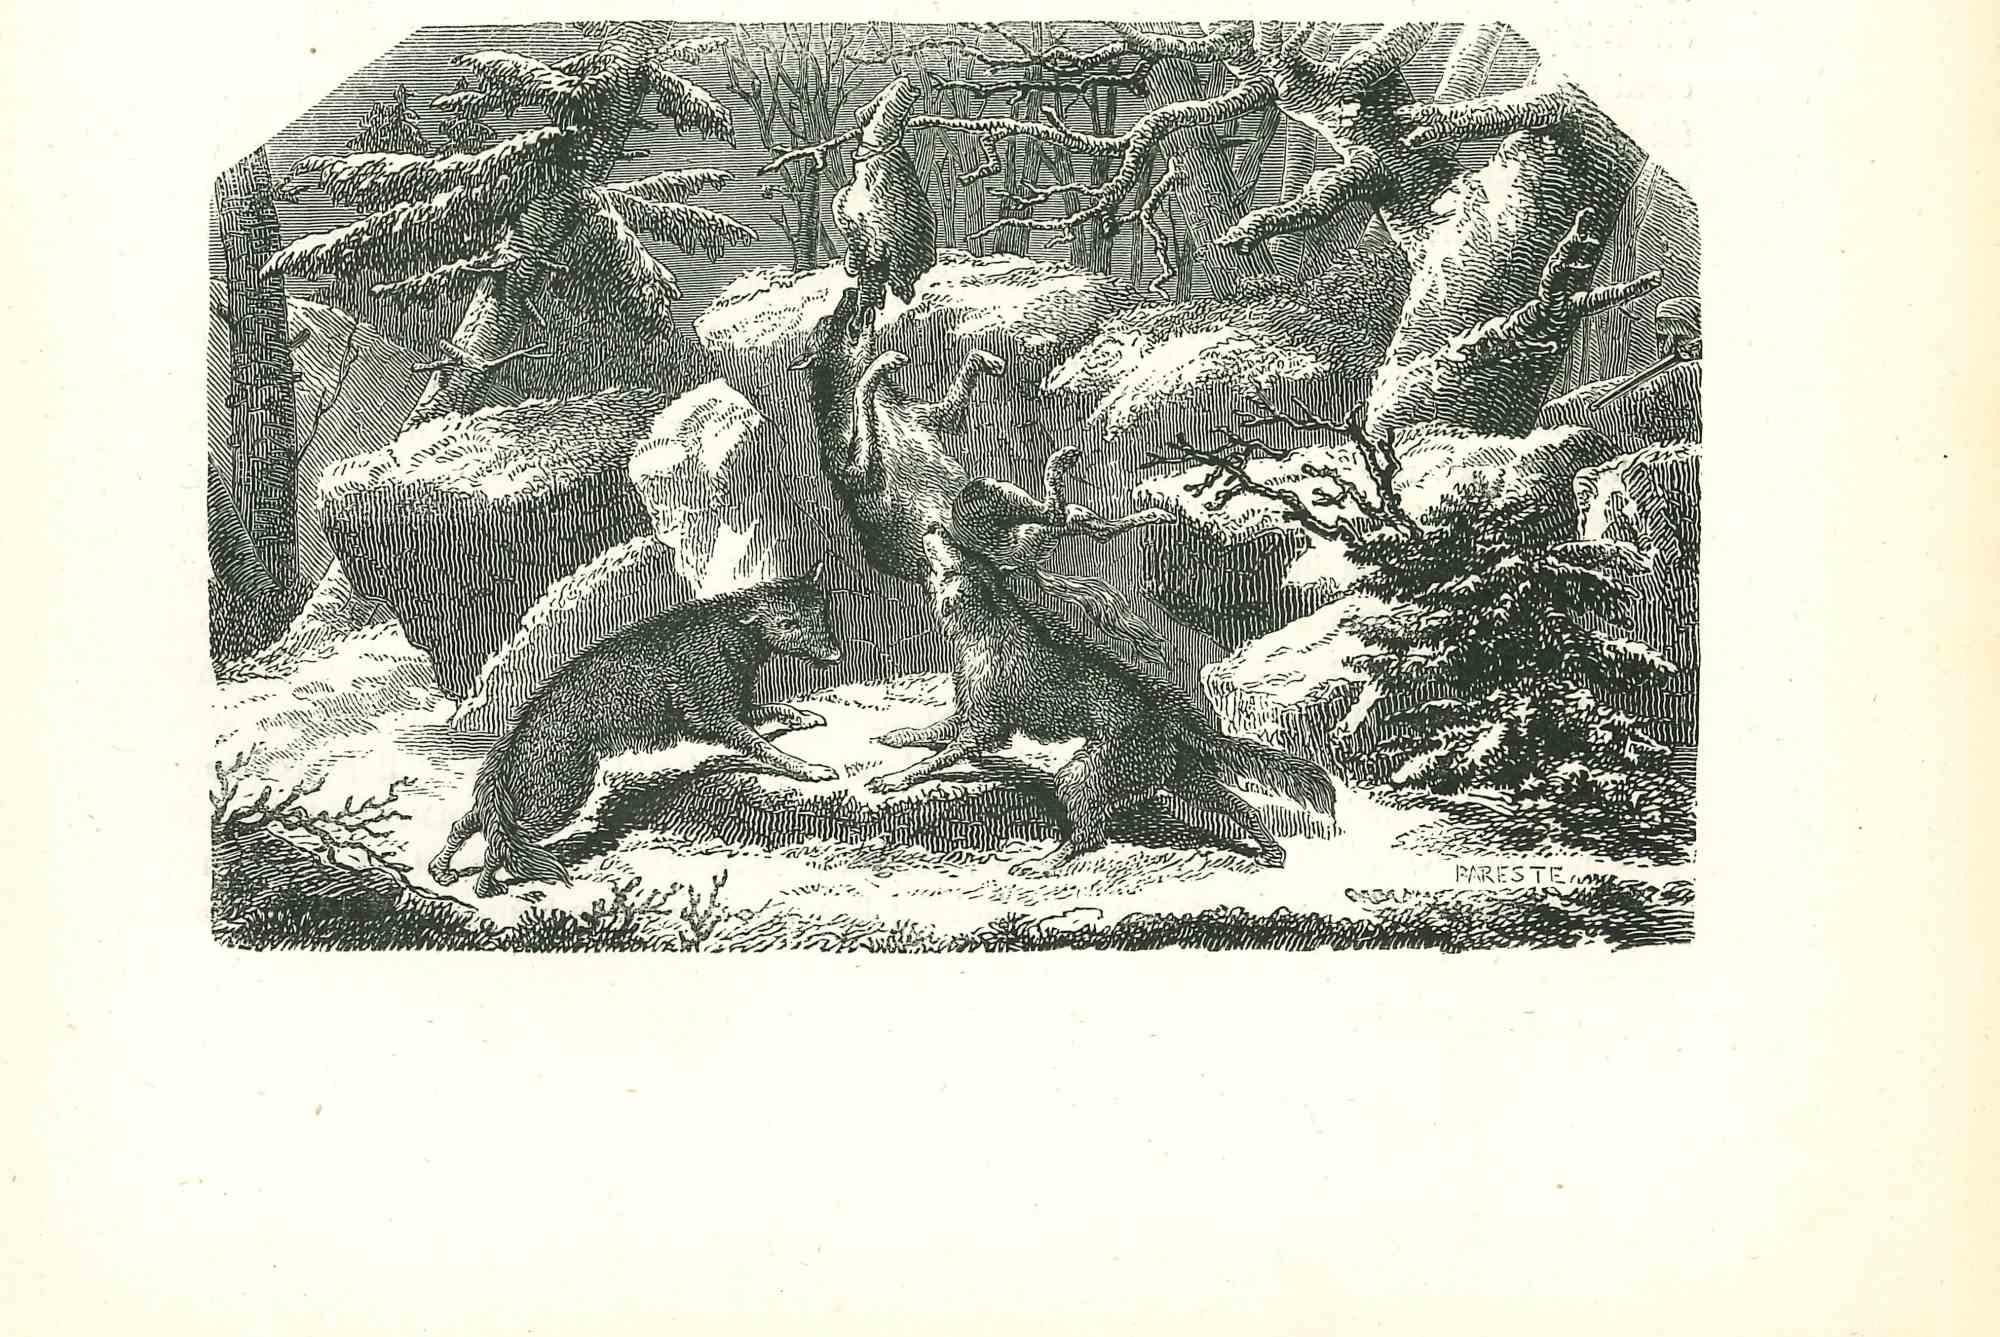 The Wolves In The Winter is an original lithograph on ivory-colored paper, realized by Paul Gervais (1816-1879). The artwork is from The Series of "Les Trois Règnes de la Nature", and was published in 1854.

Good conditions.

Titled on the lower.